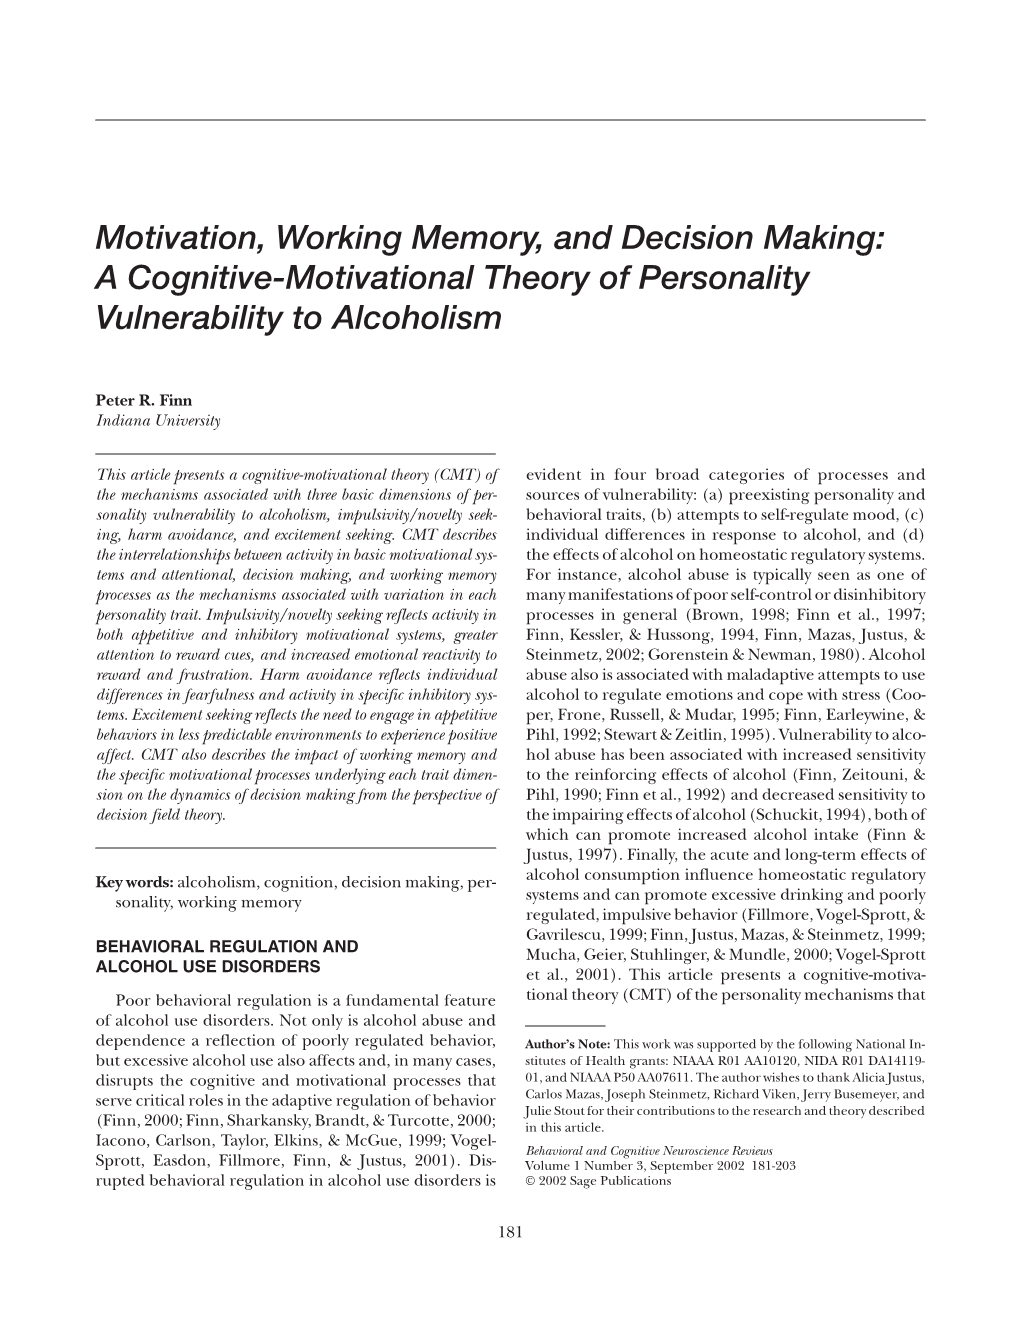 Motivation, Working Memory, and Decision Making: a Cognitive-Motivational Theory of Personality Vulnerability to Alcoholism